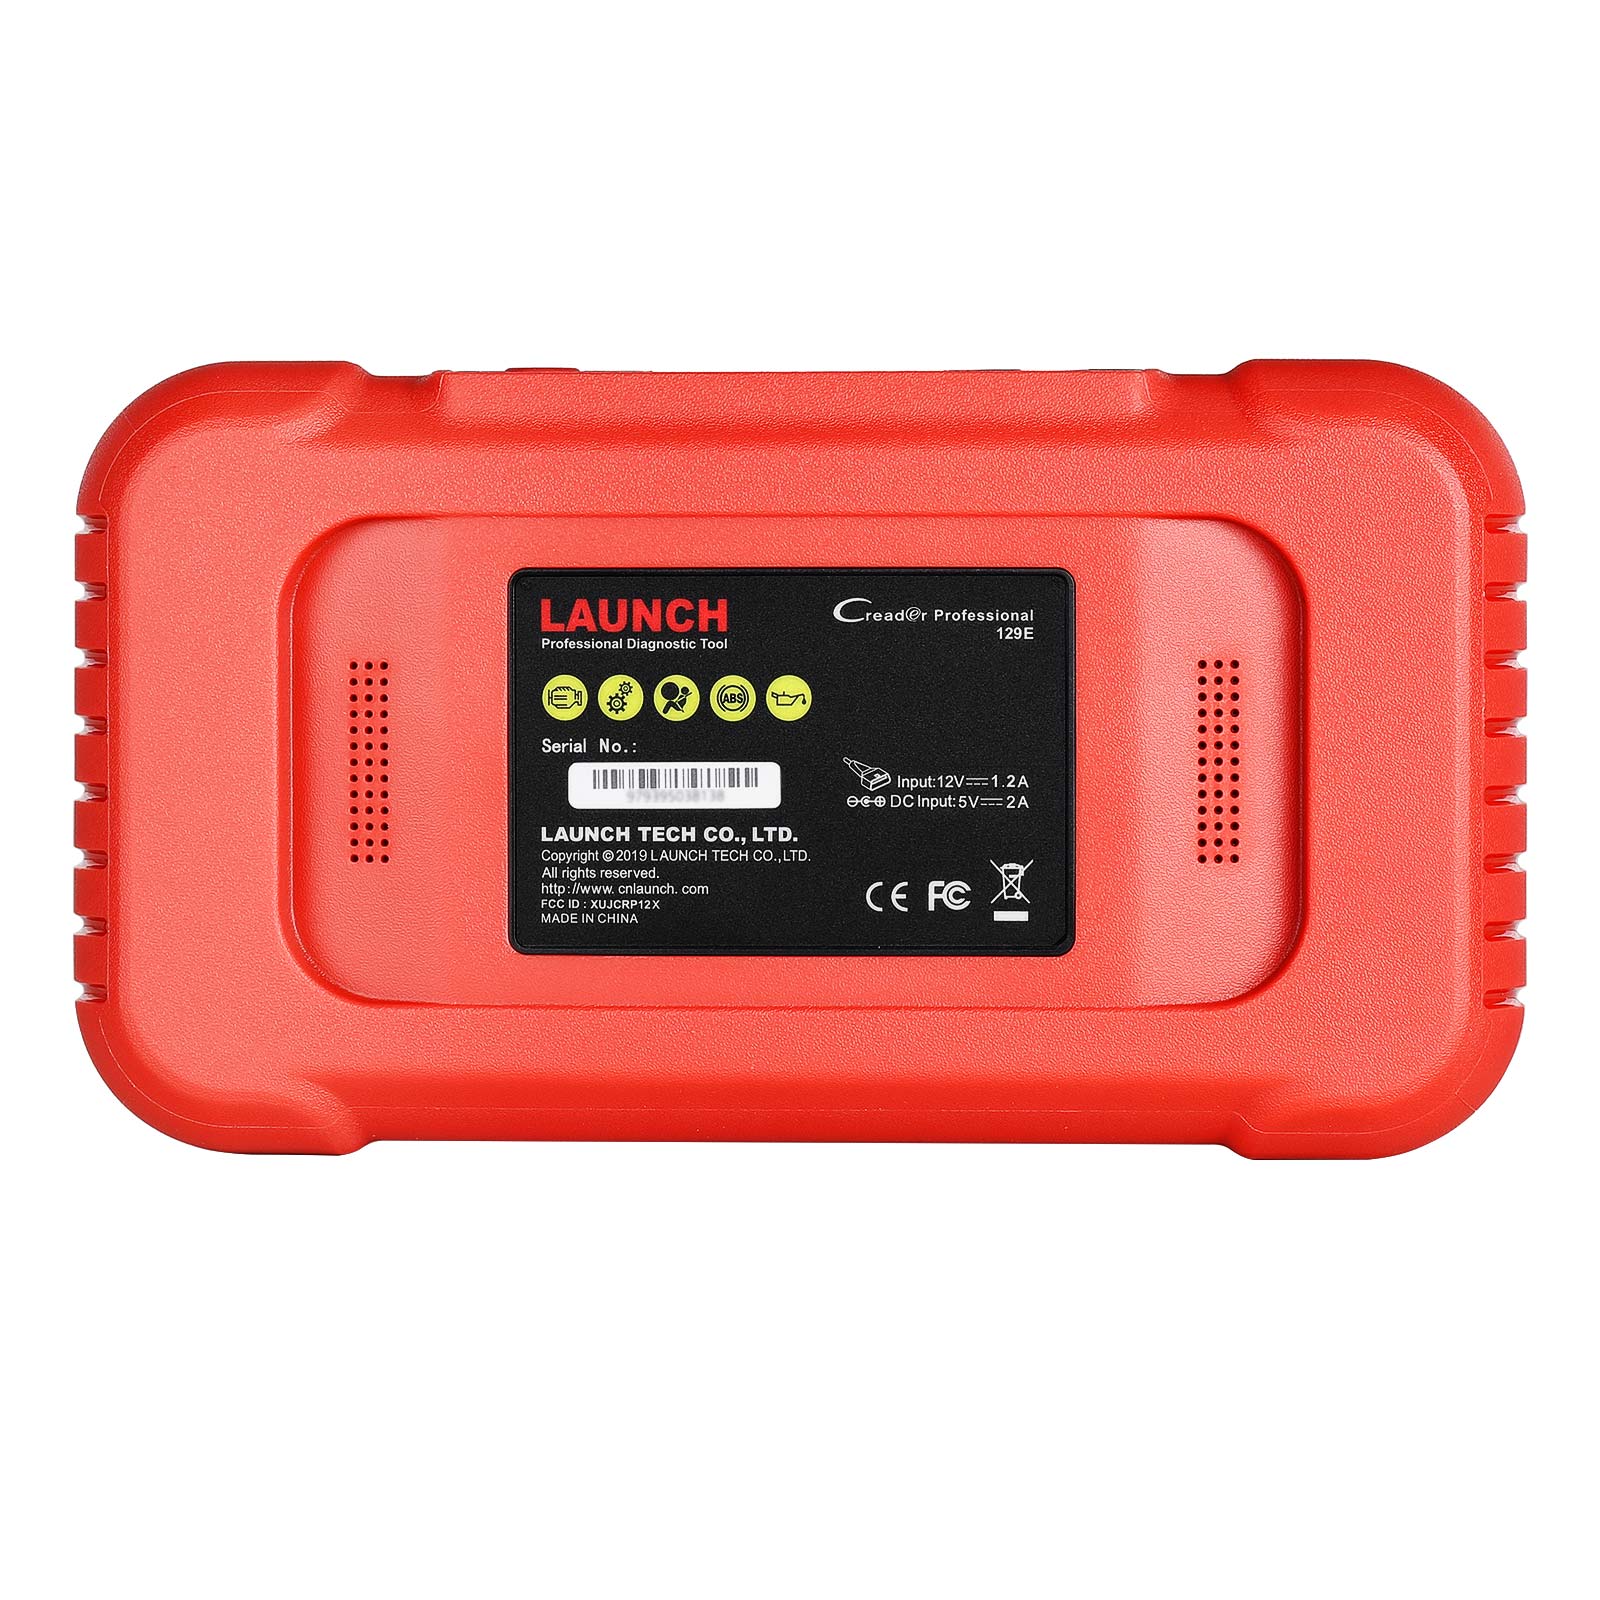 LAUNCH CRP129I-OBD2 Scanner ABS/SRS/Engine/Transmission Diagnoses with 15  Reset Throttle Matching/Oil/EPB/SAS/TPMS【Lifetime Free Update】Check Engine  Code Reader 